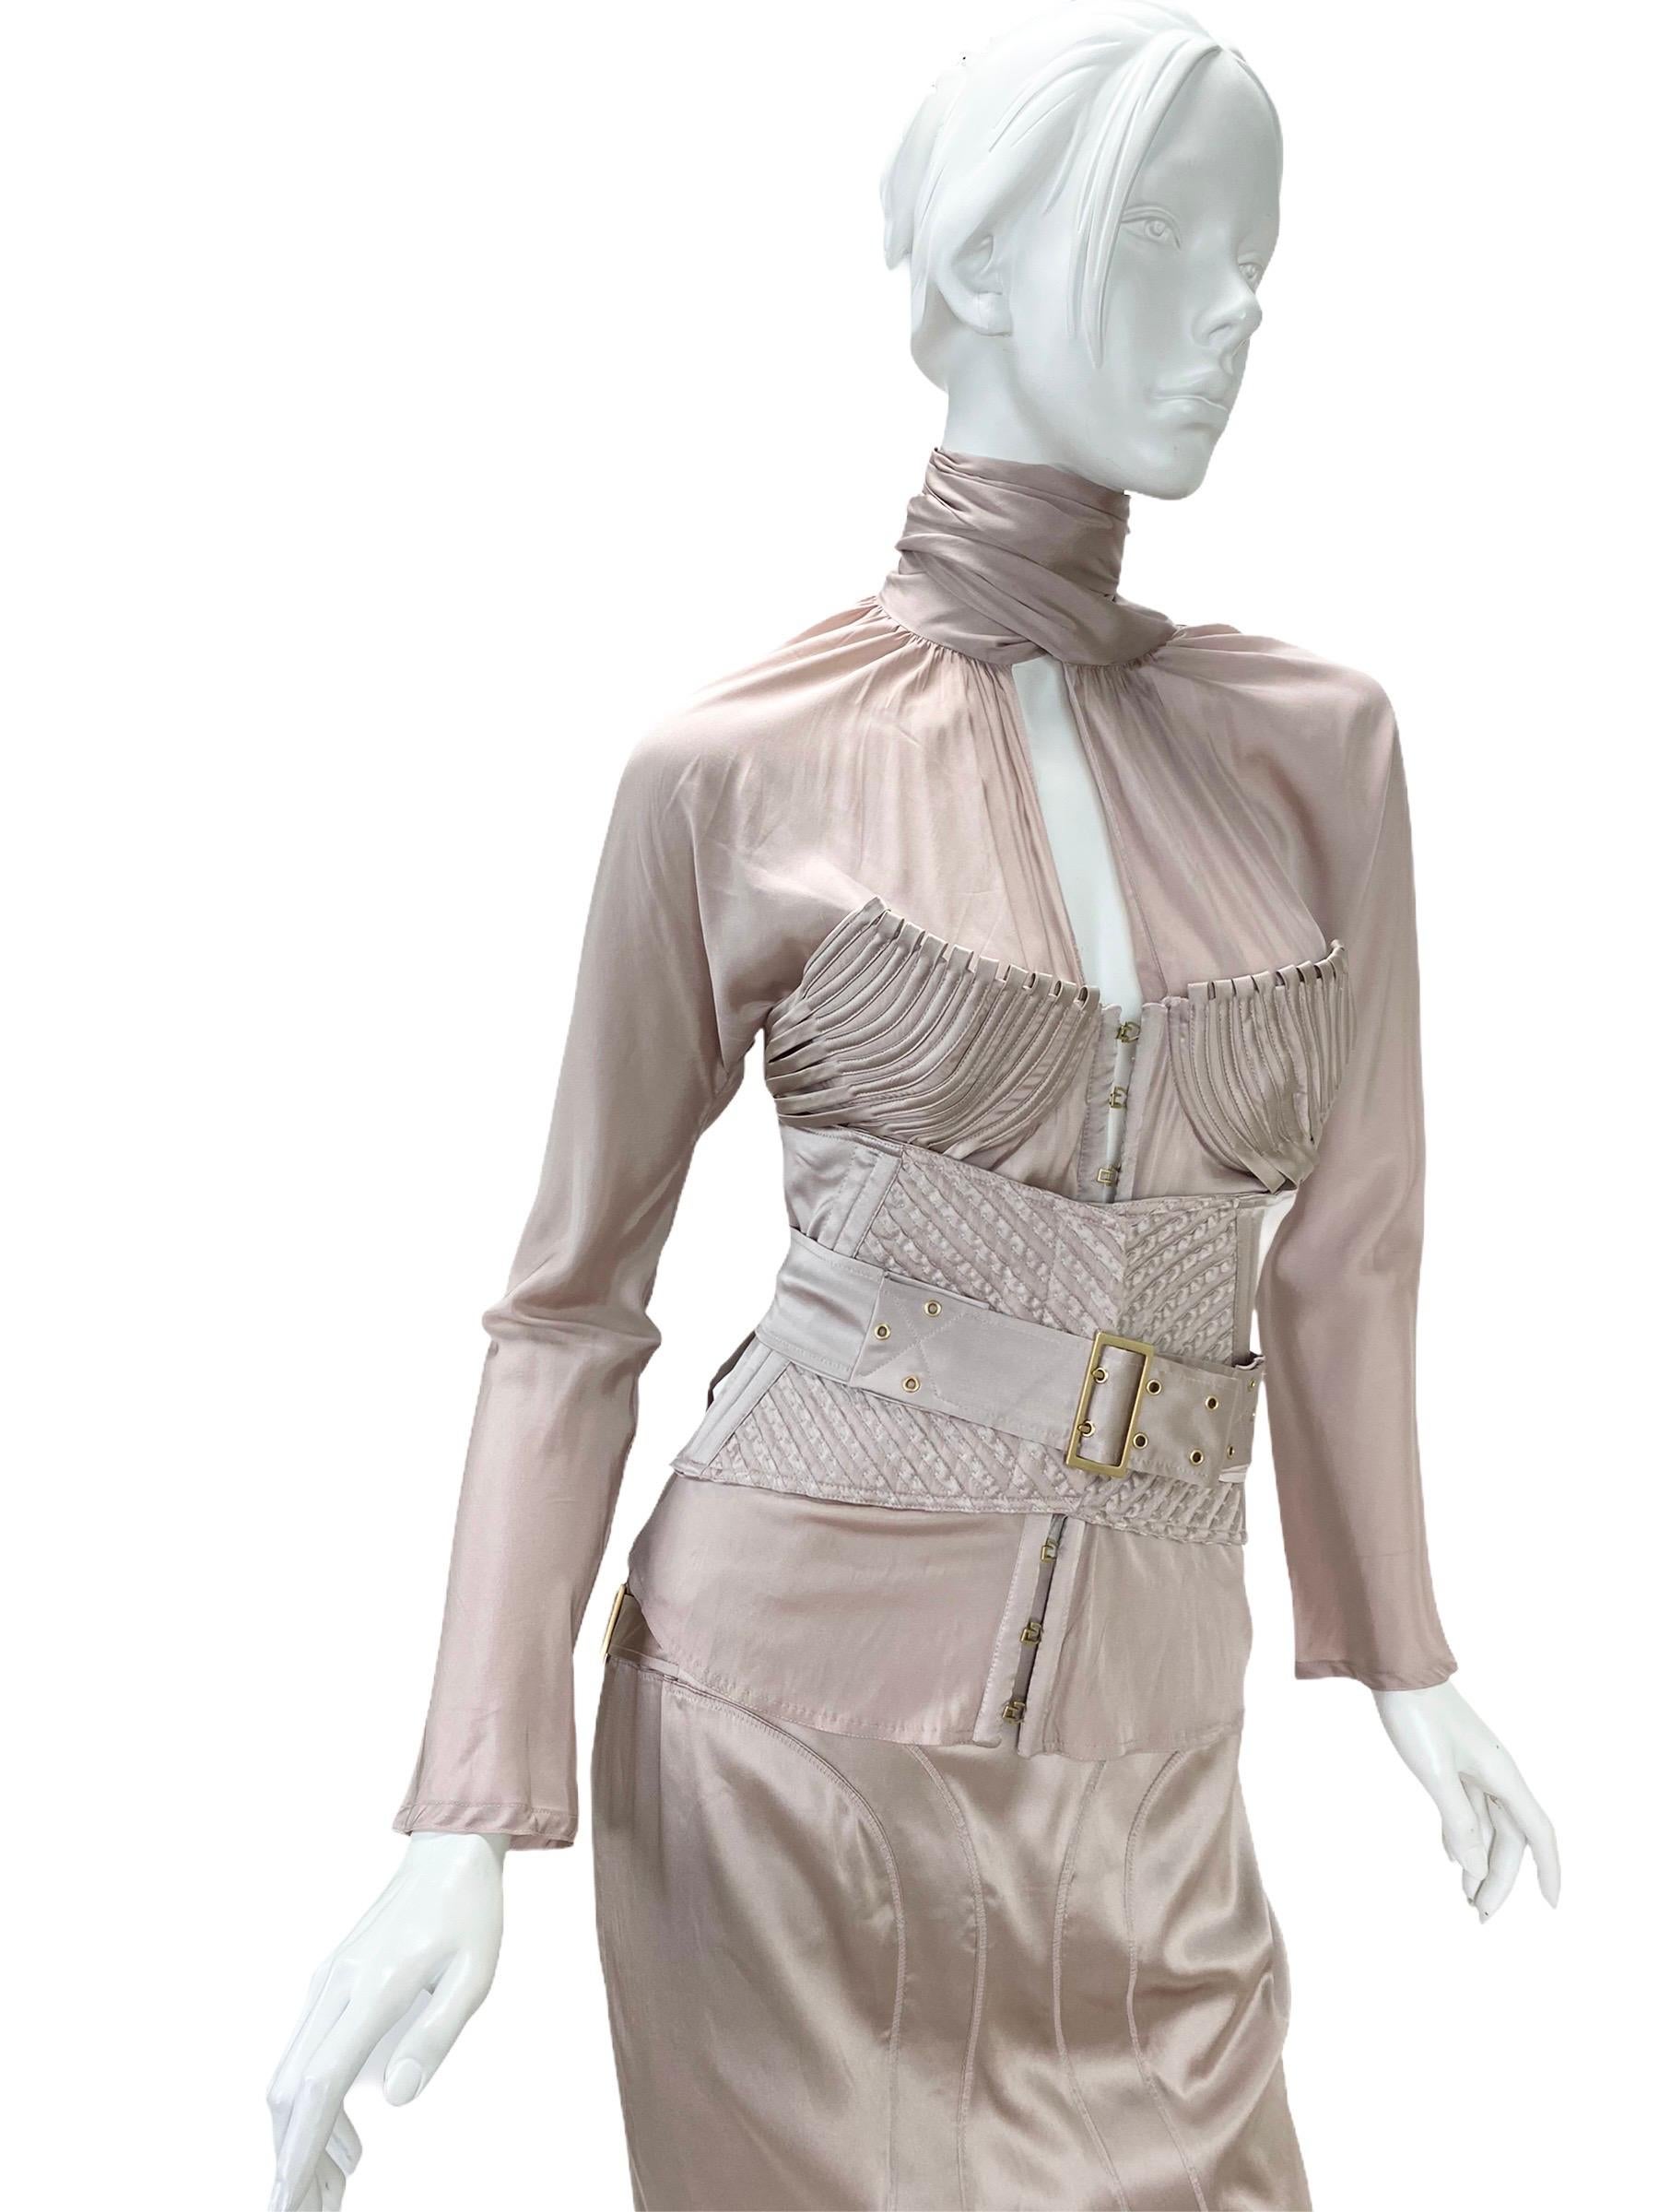 F/W 2003 Tom Ford for Gucci

Silk suit with corset belt

Unique, Rare and Highly Collectible! As seen on Gwen in her video 